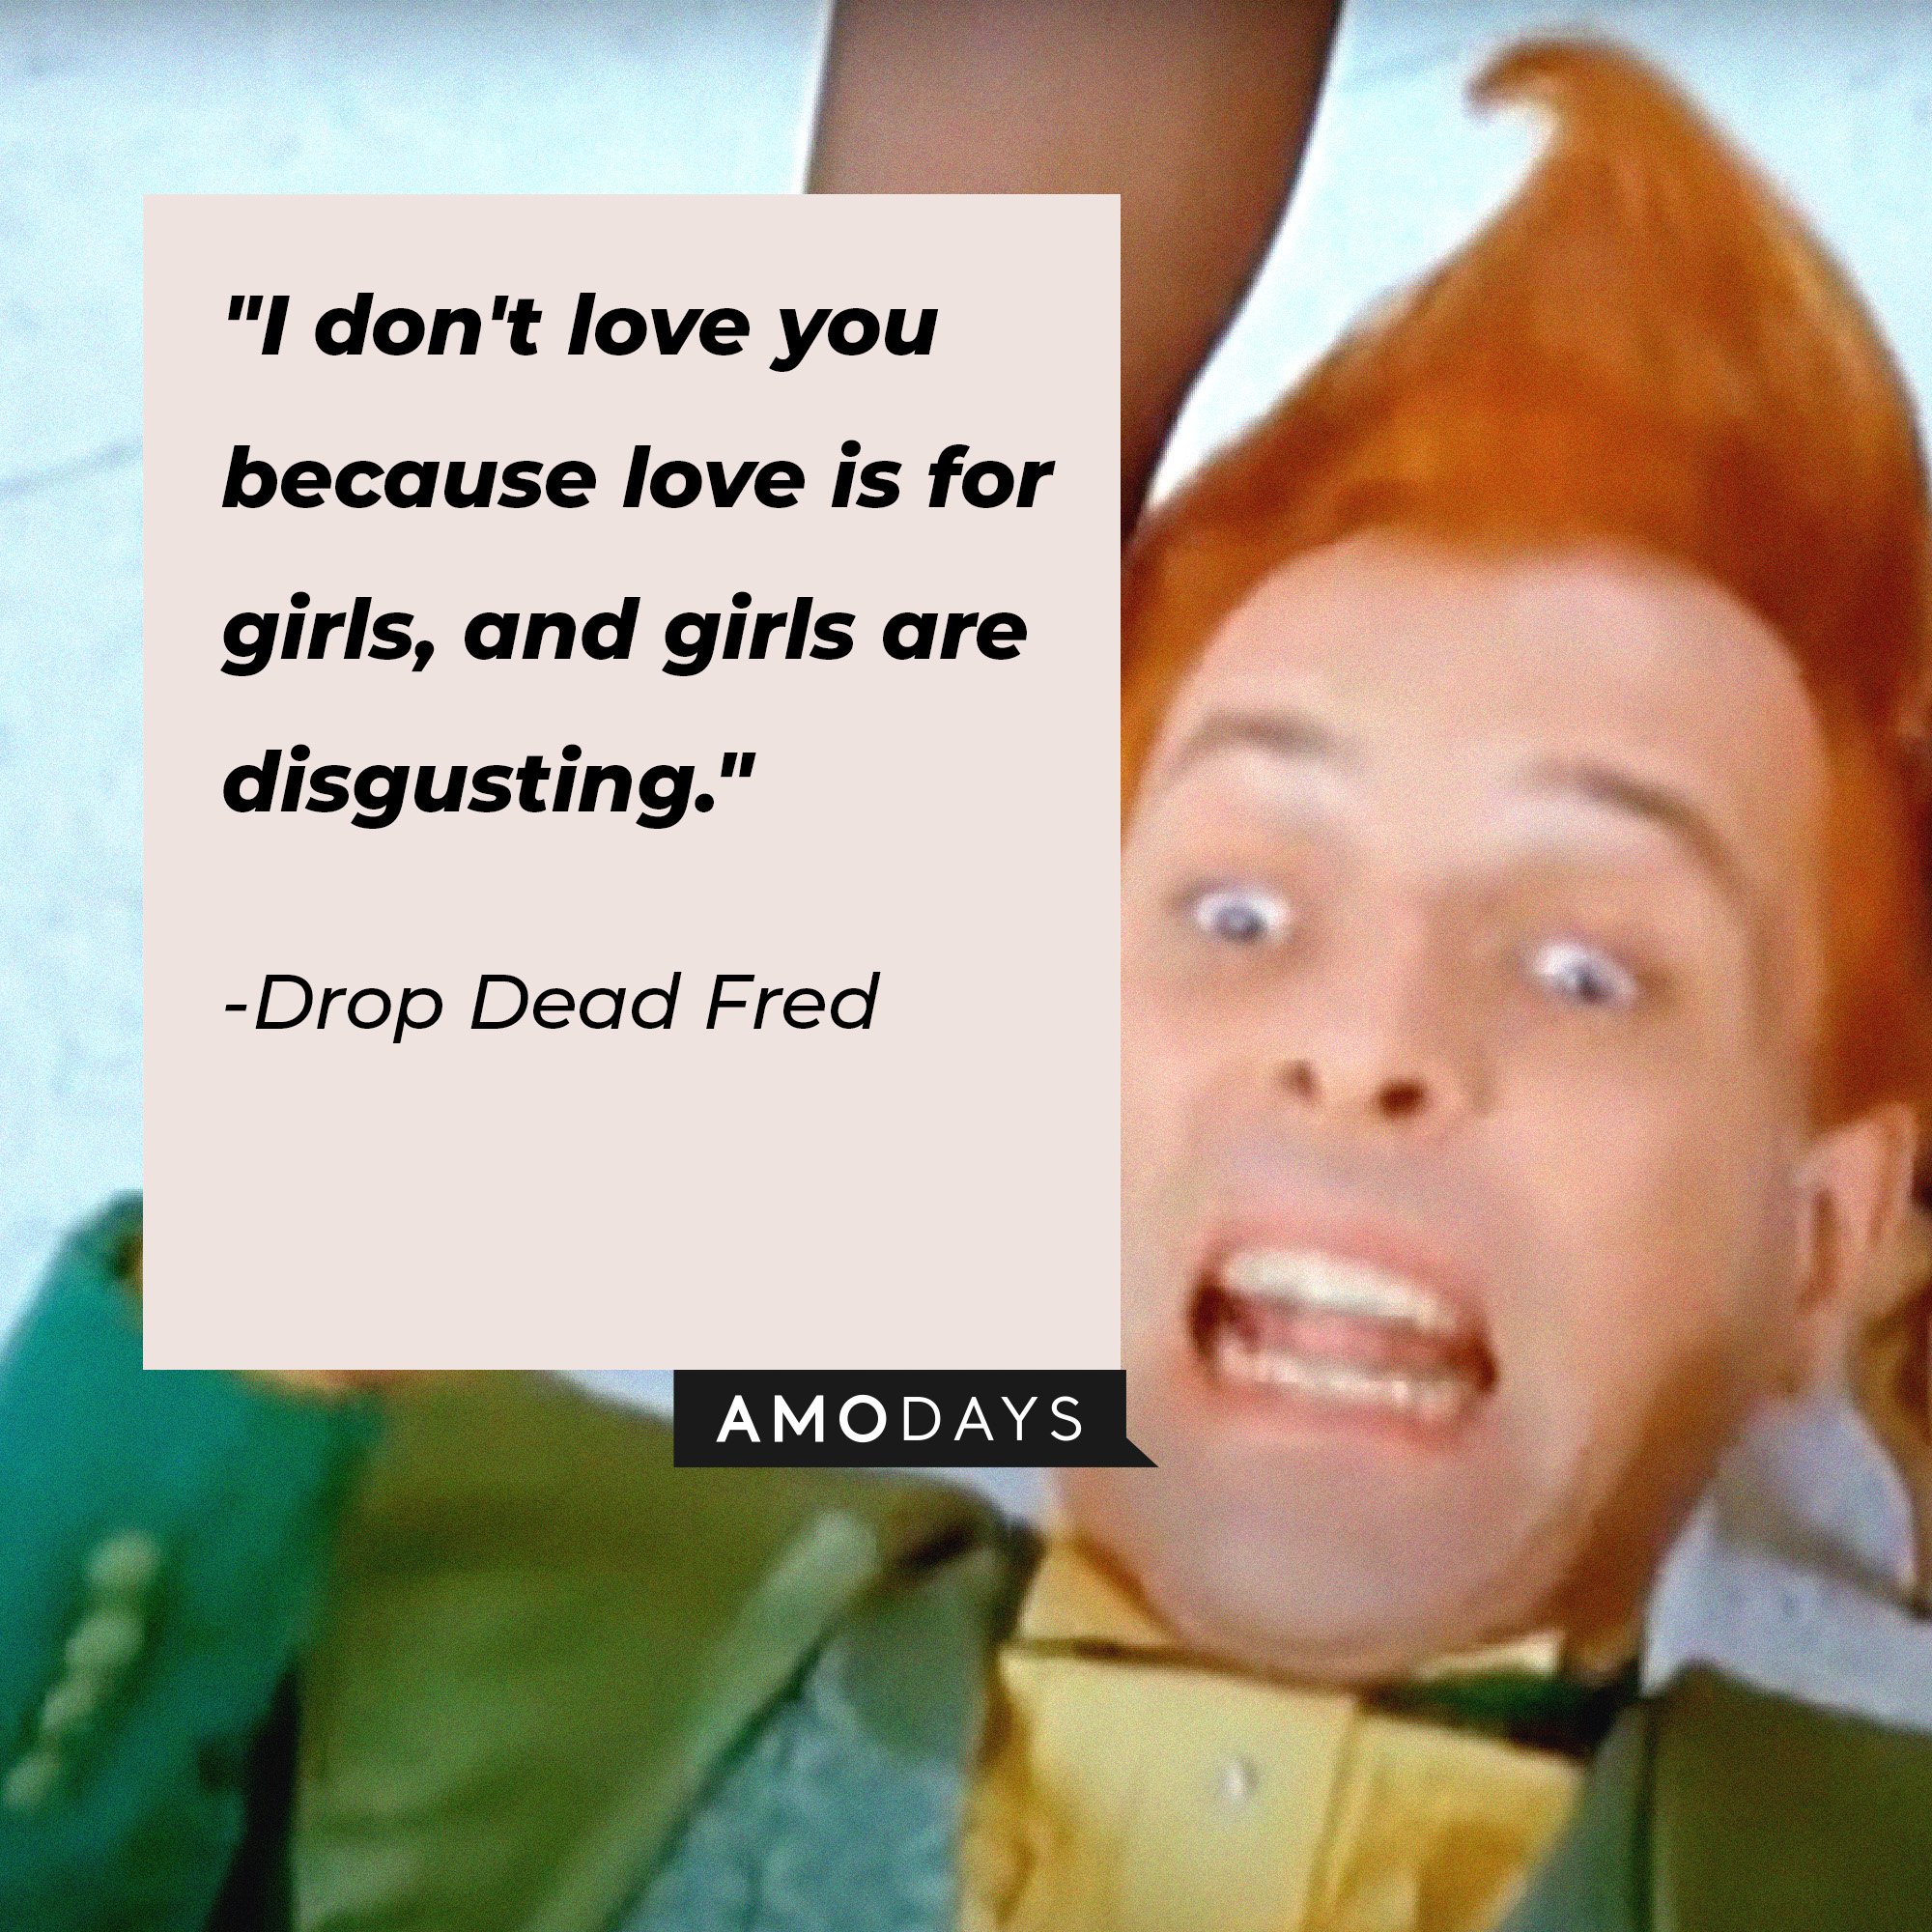 Drop Dead Fred's quote:"I don't love you because love is for girls, and girls are disgusting." | Image: AmoDays